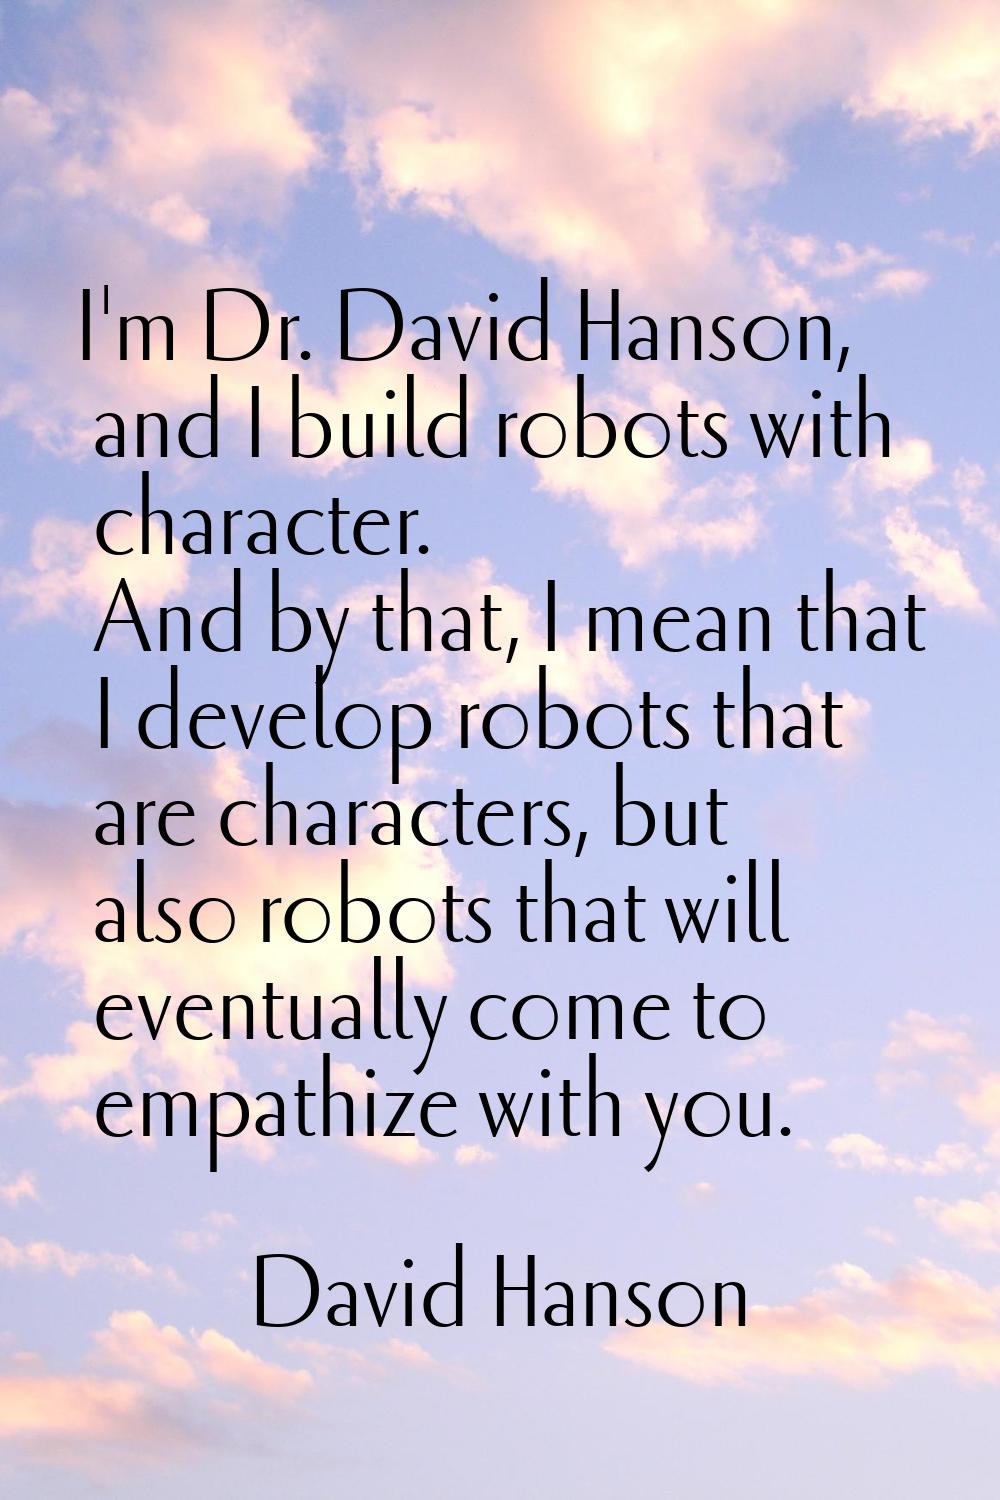 I'm Dr. David Hanson, and I build robots with character. And by that, I mean that I develop robots 